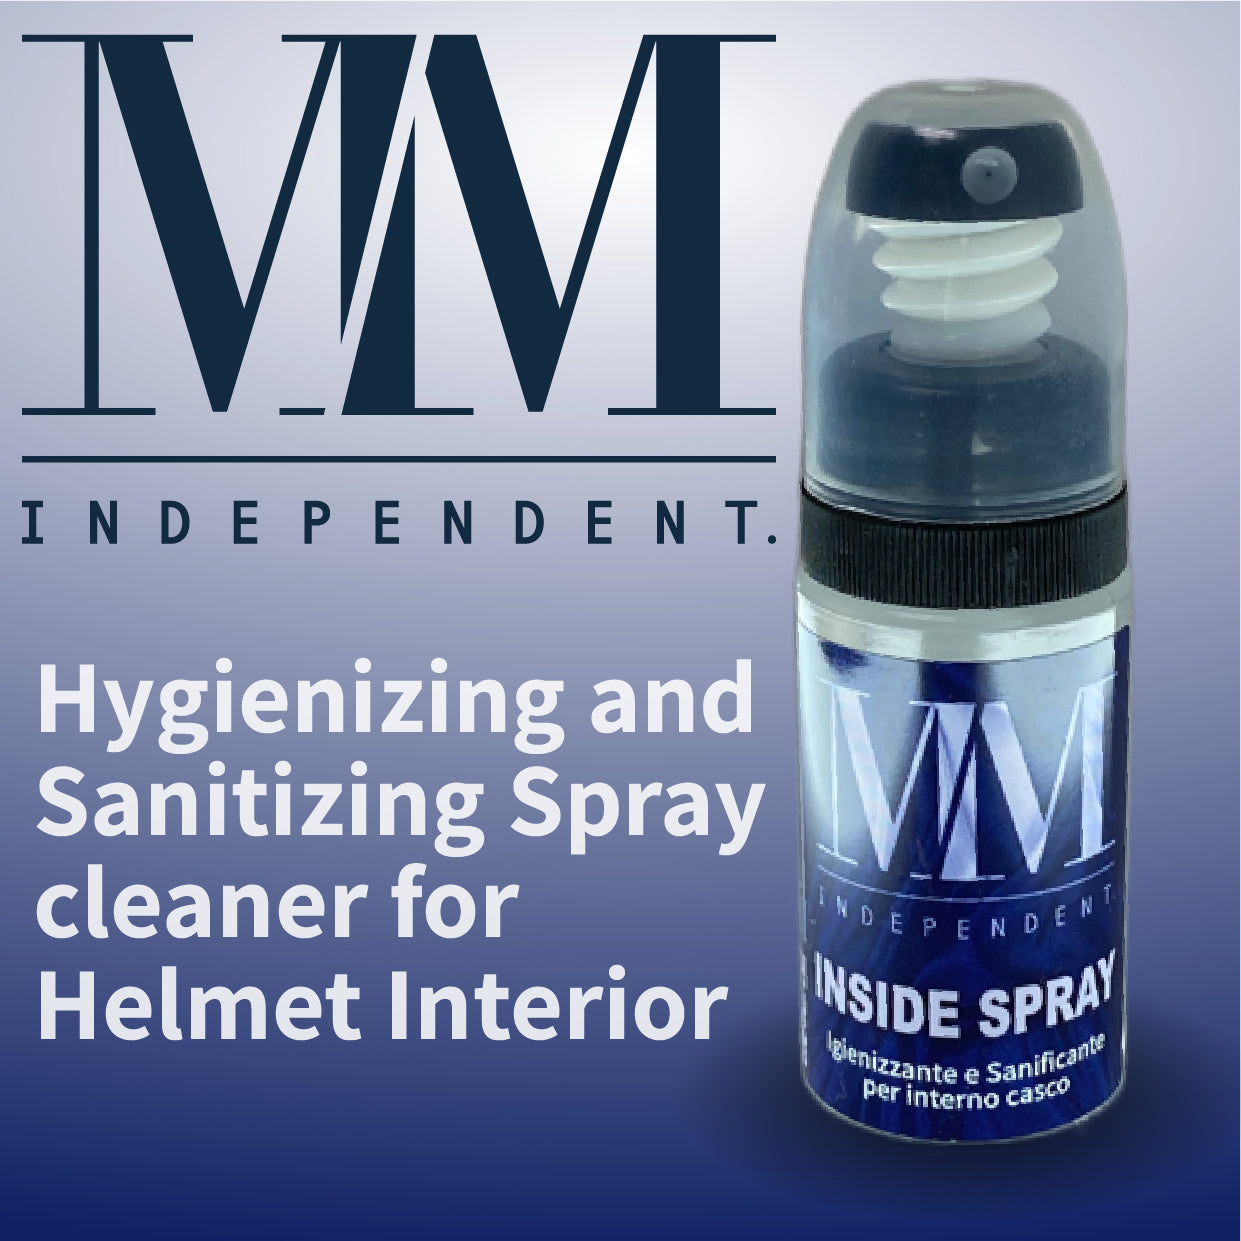 Hygienizing and Sanitizing Spray for Helmets MM Independent